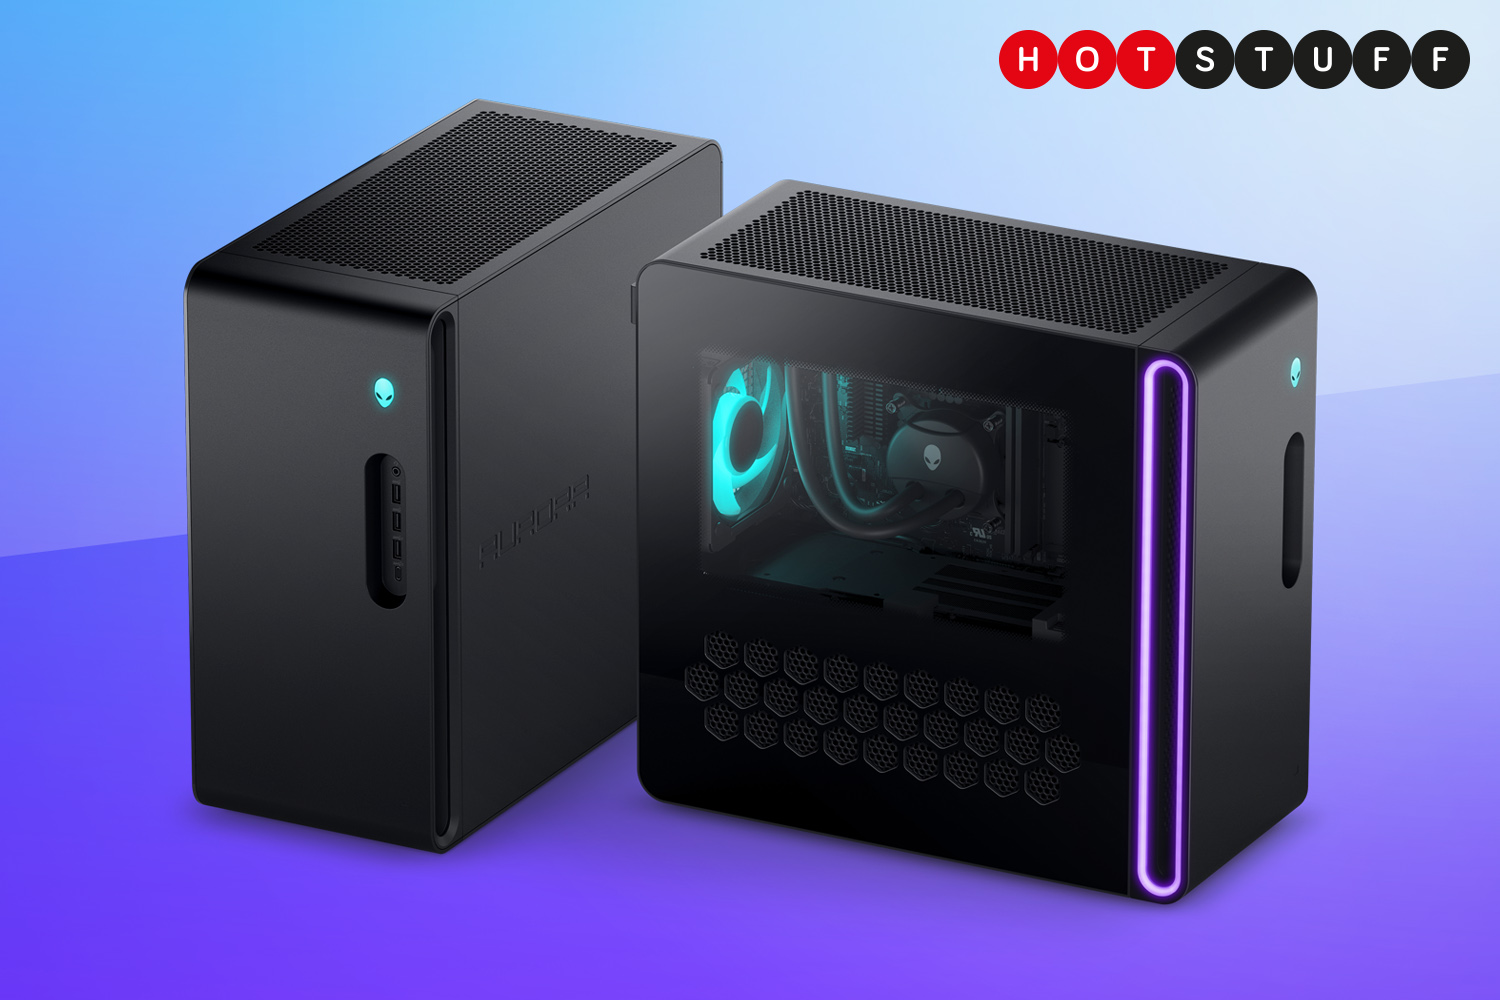 Alienware R16 Gaming Desktop with Air Cooling & Liquid Cooling